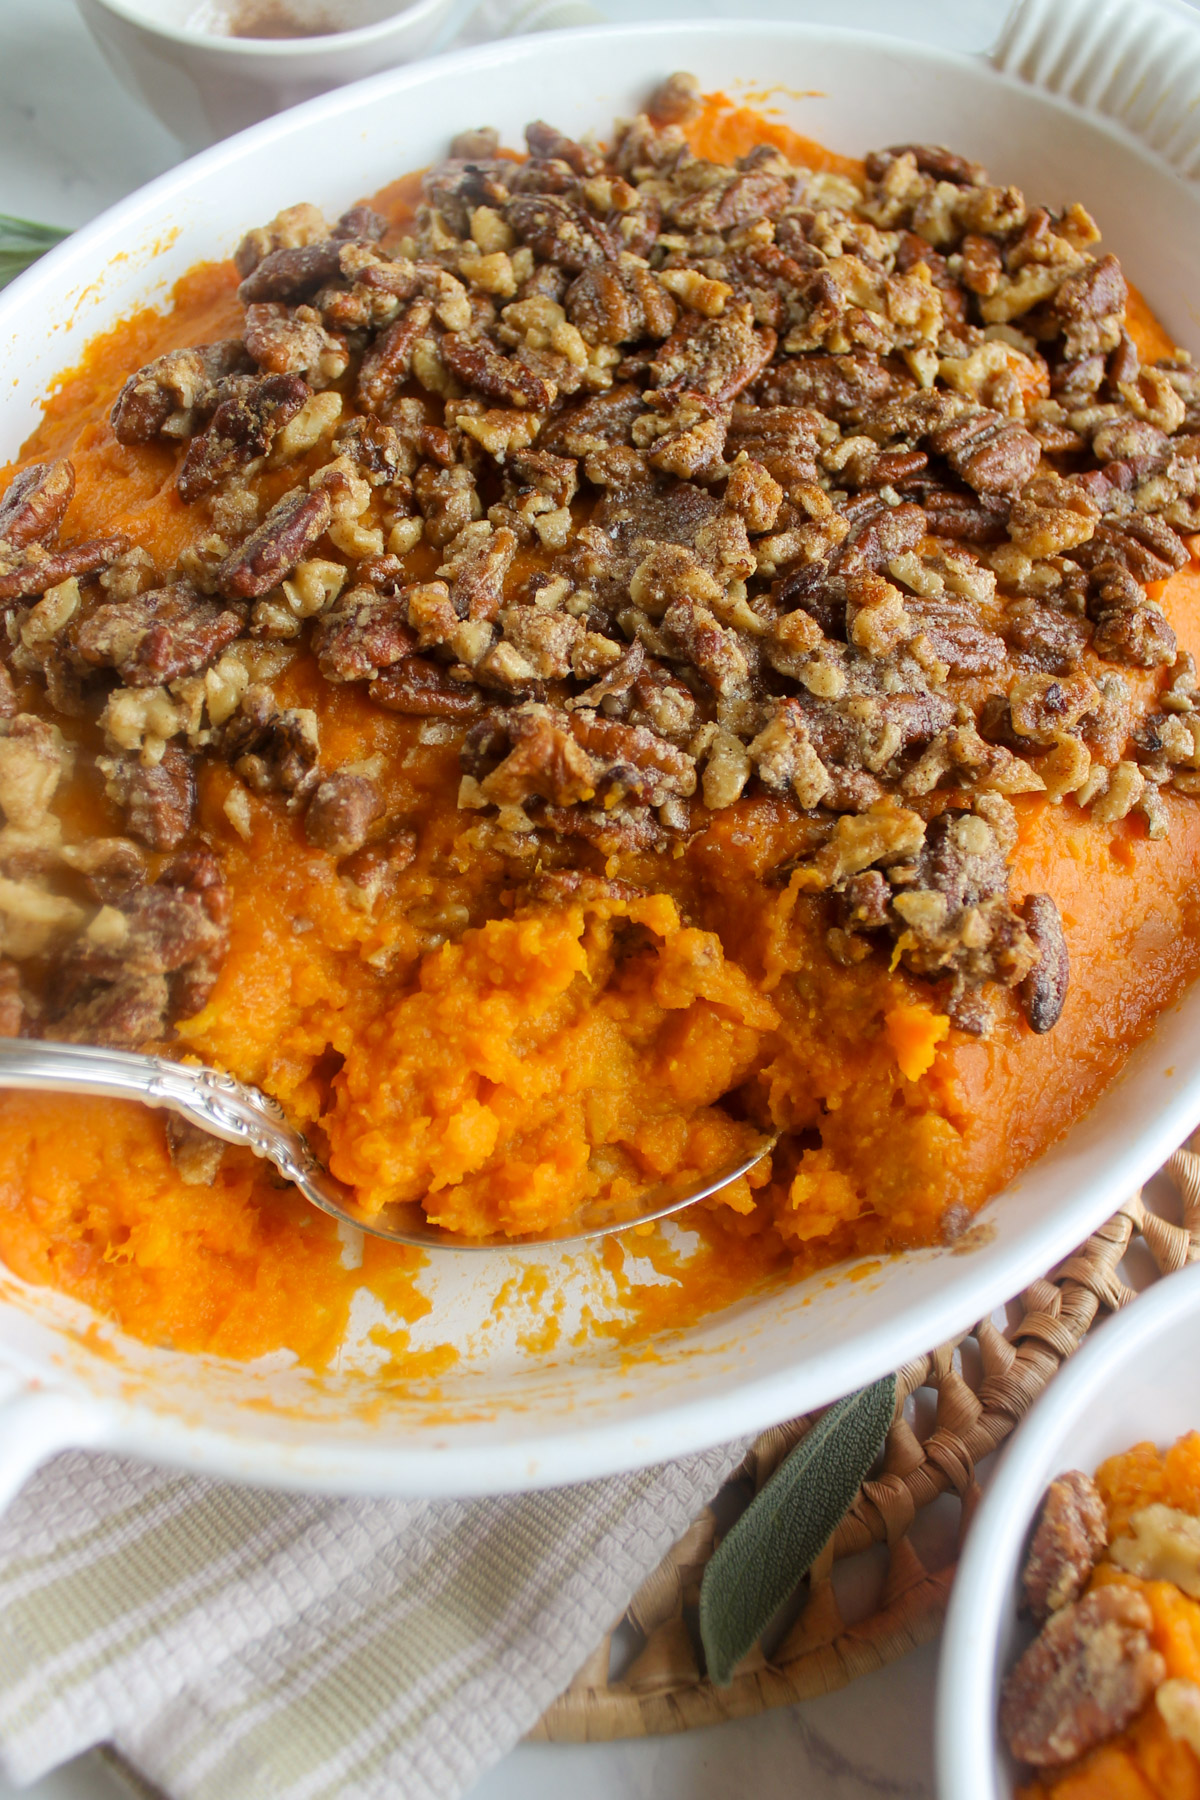 A spoon scooping sweet potato casserole with pecans out of a baking dish.